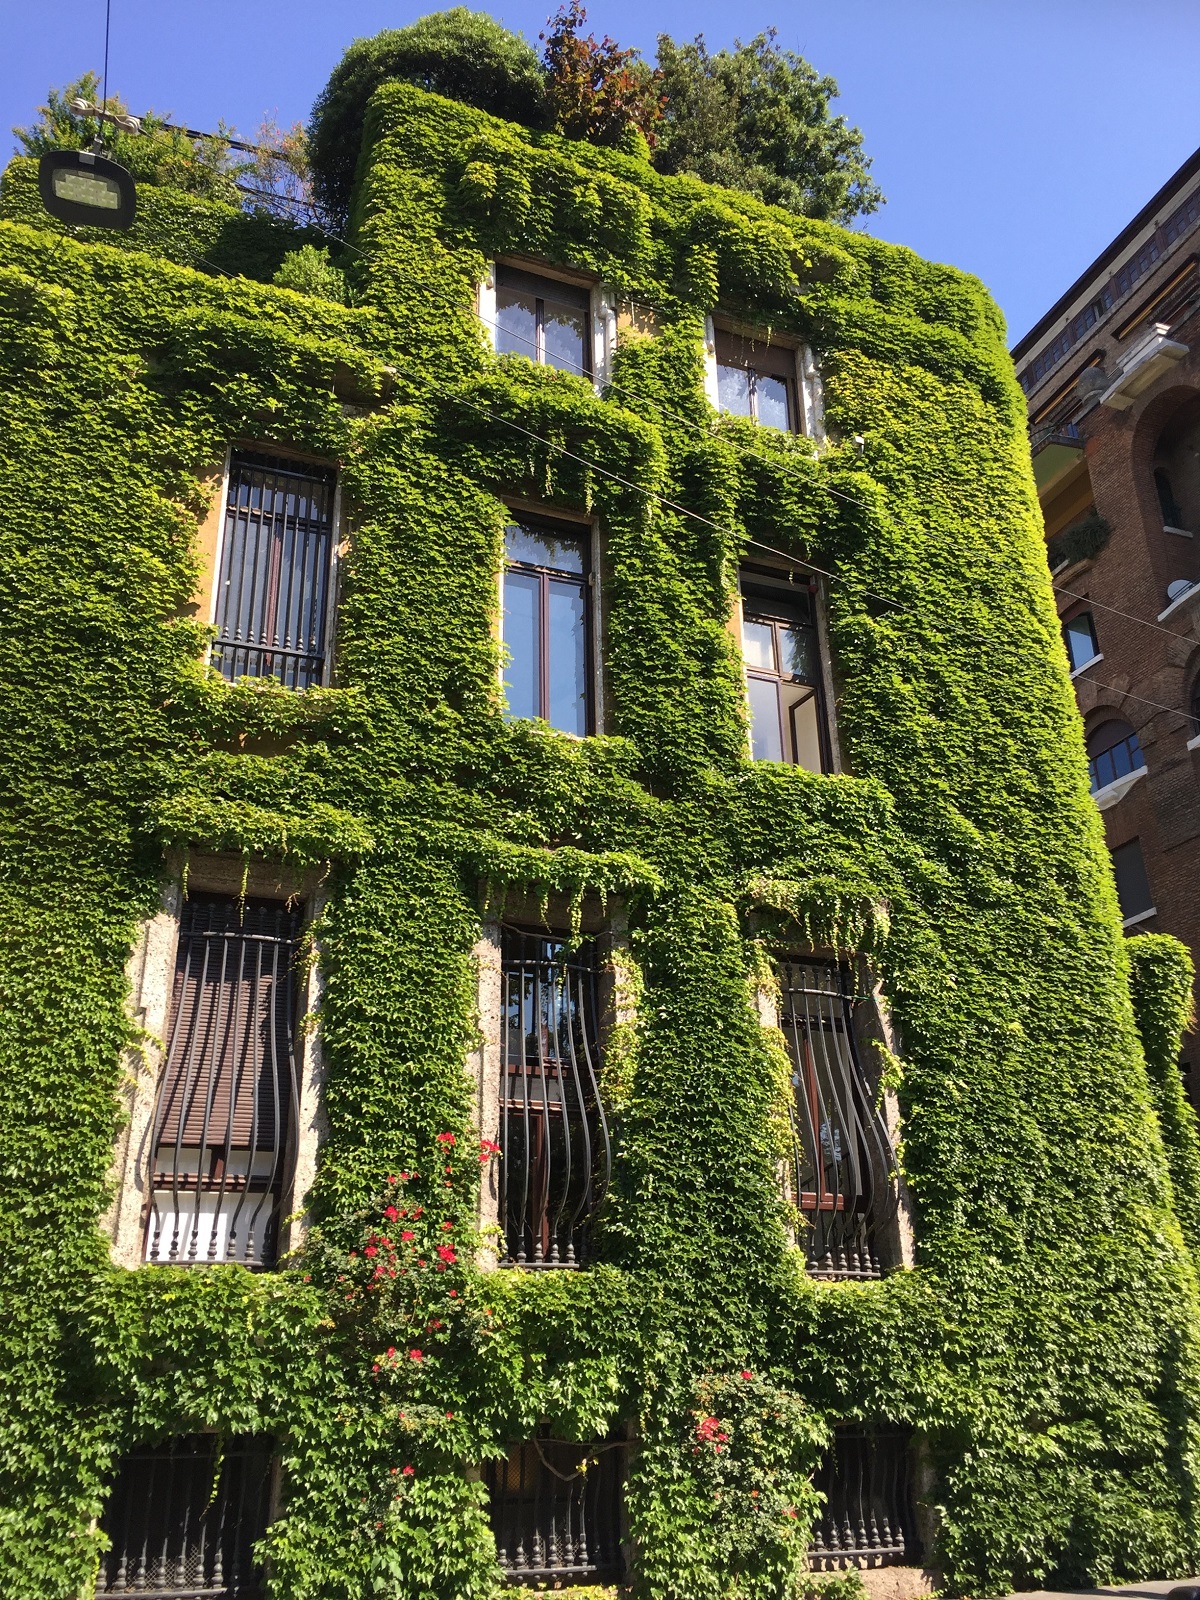 multi level building covered in greenery called villa mozart in milan